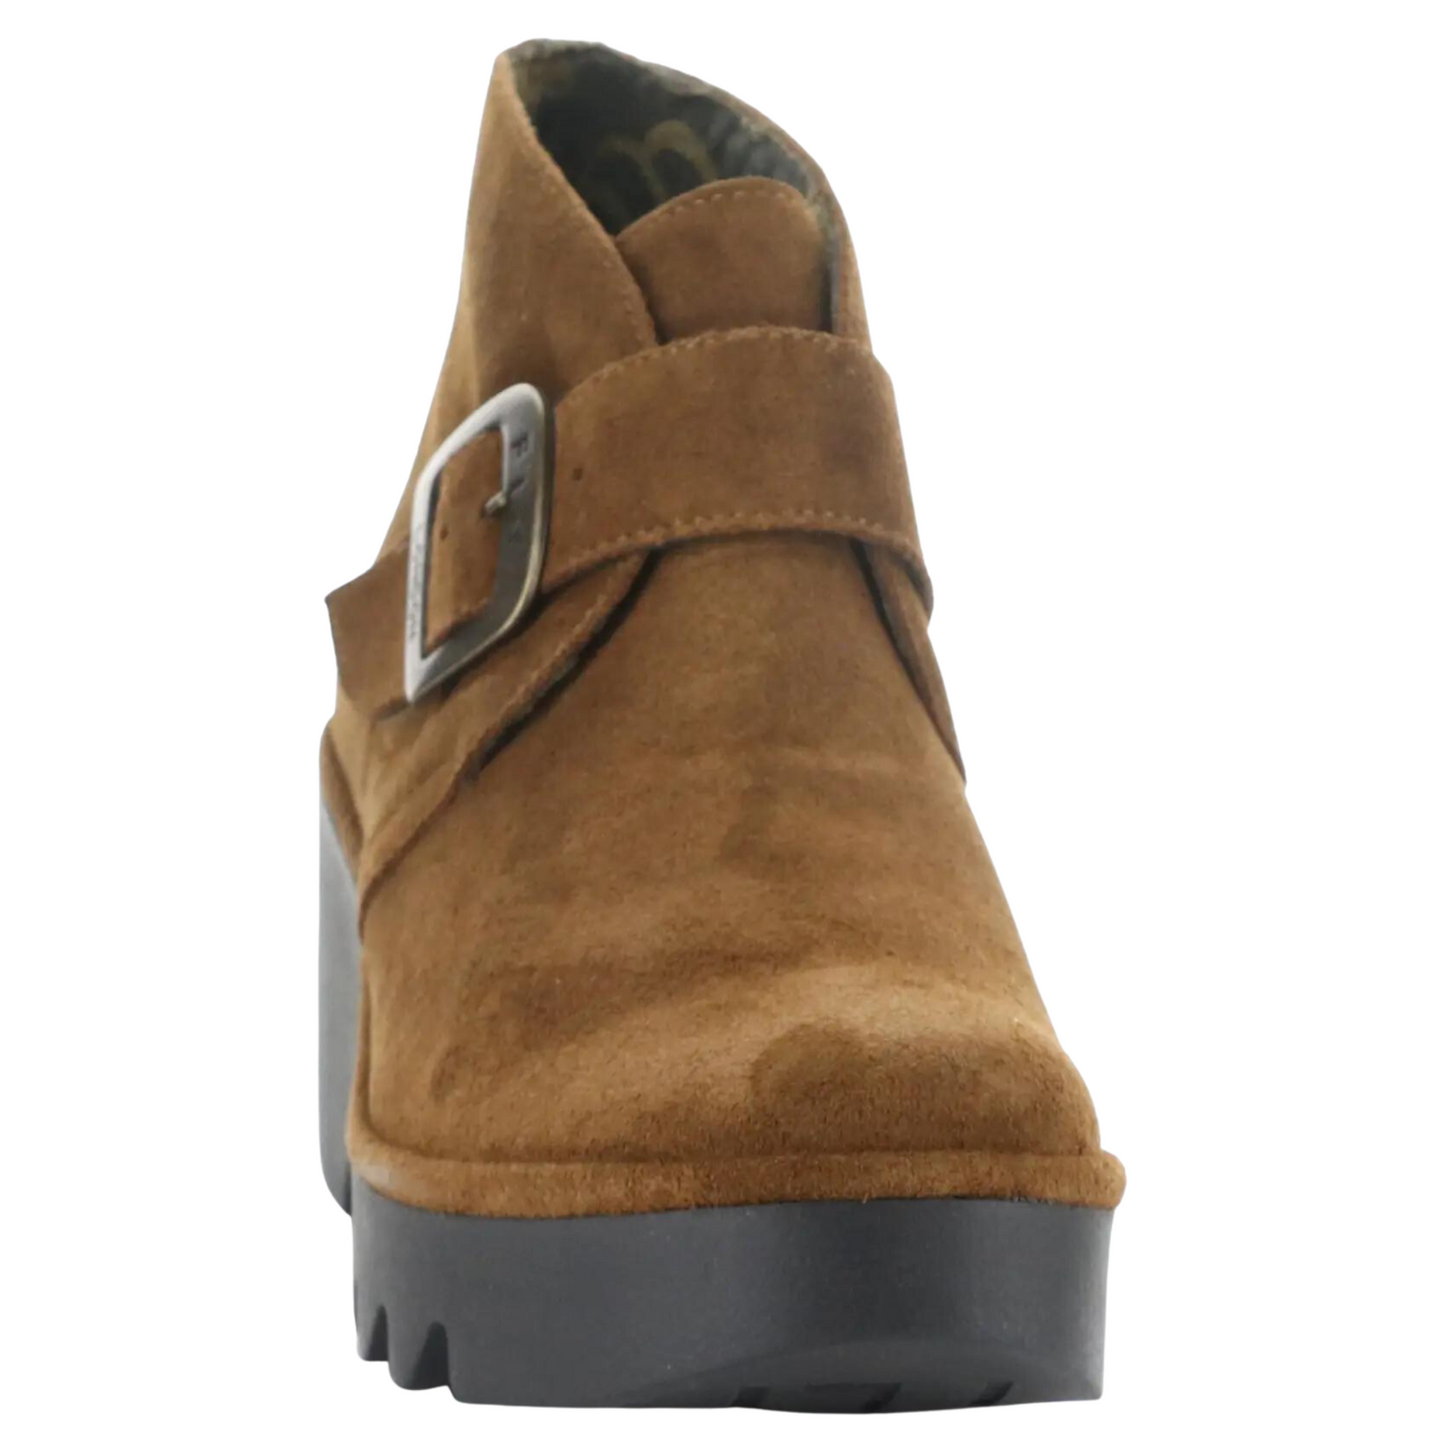 Front profile of the Fly London Birt Boot in the colour Camel Tan.